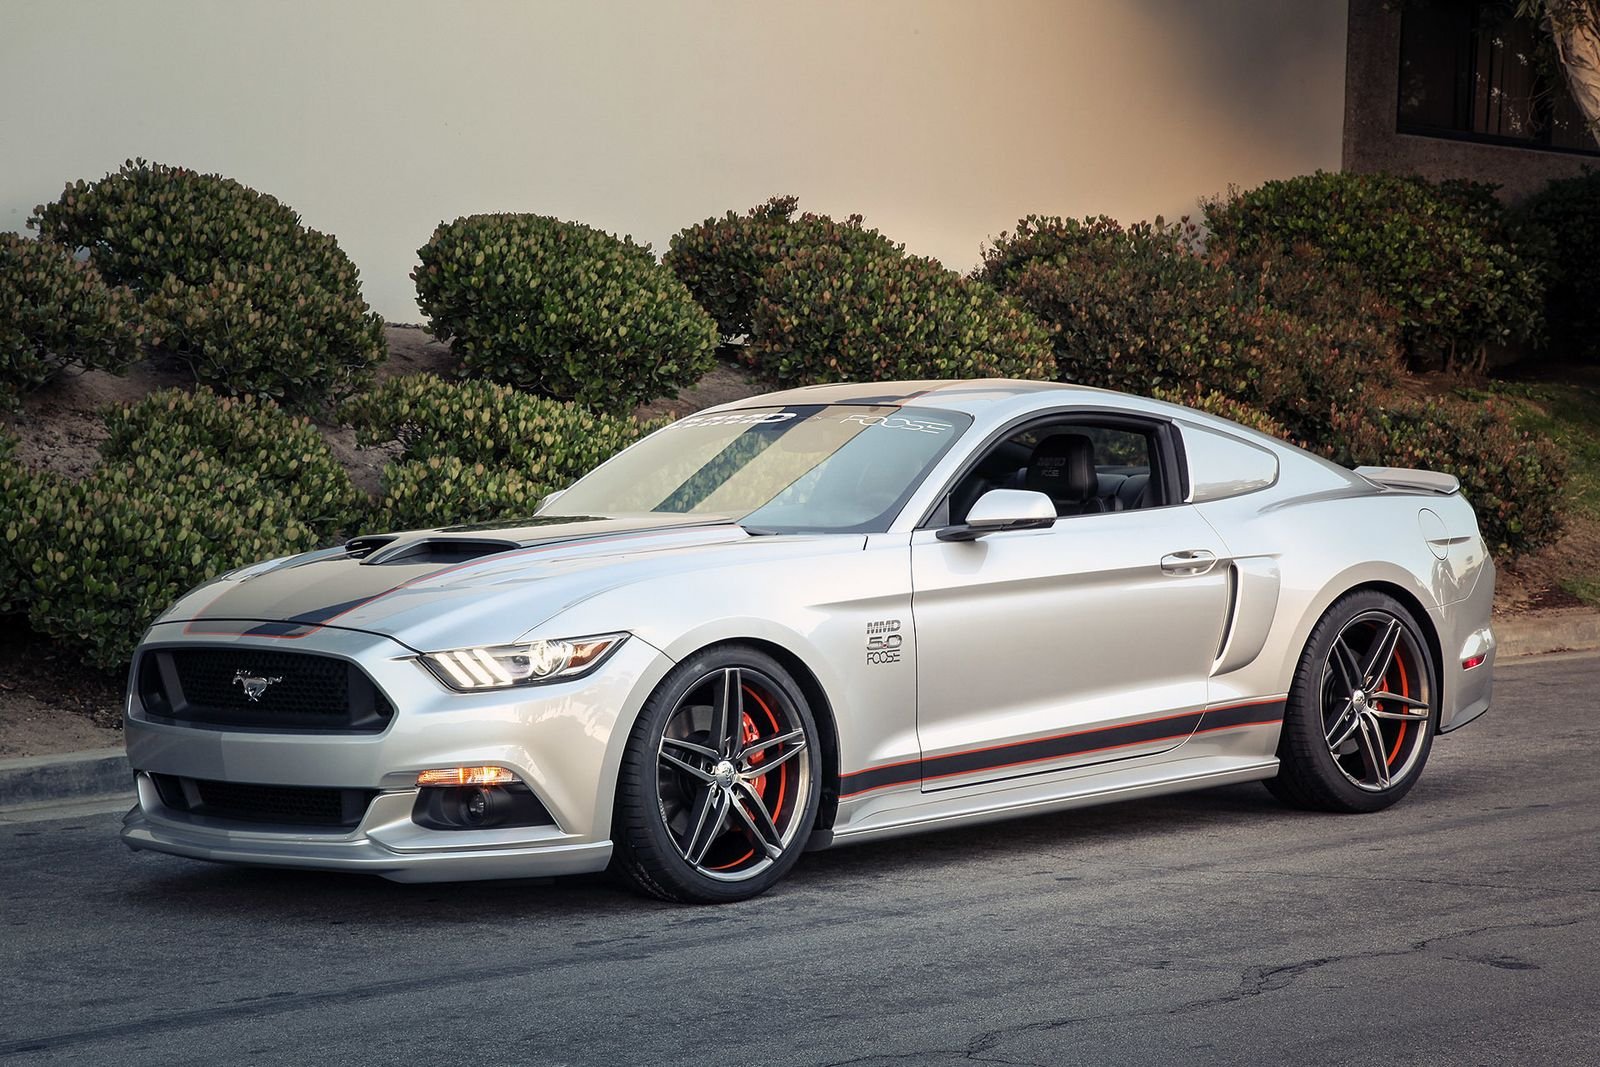 muscle, Chip, Foose, Ford, Mustang, 2016, Bodykit, Modified, Coupe, Cars Wallpaper